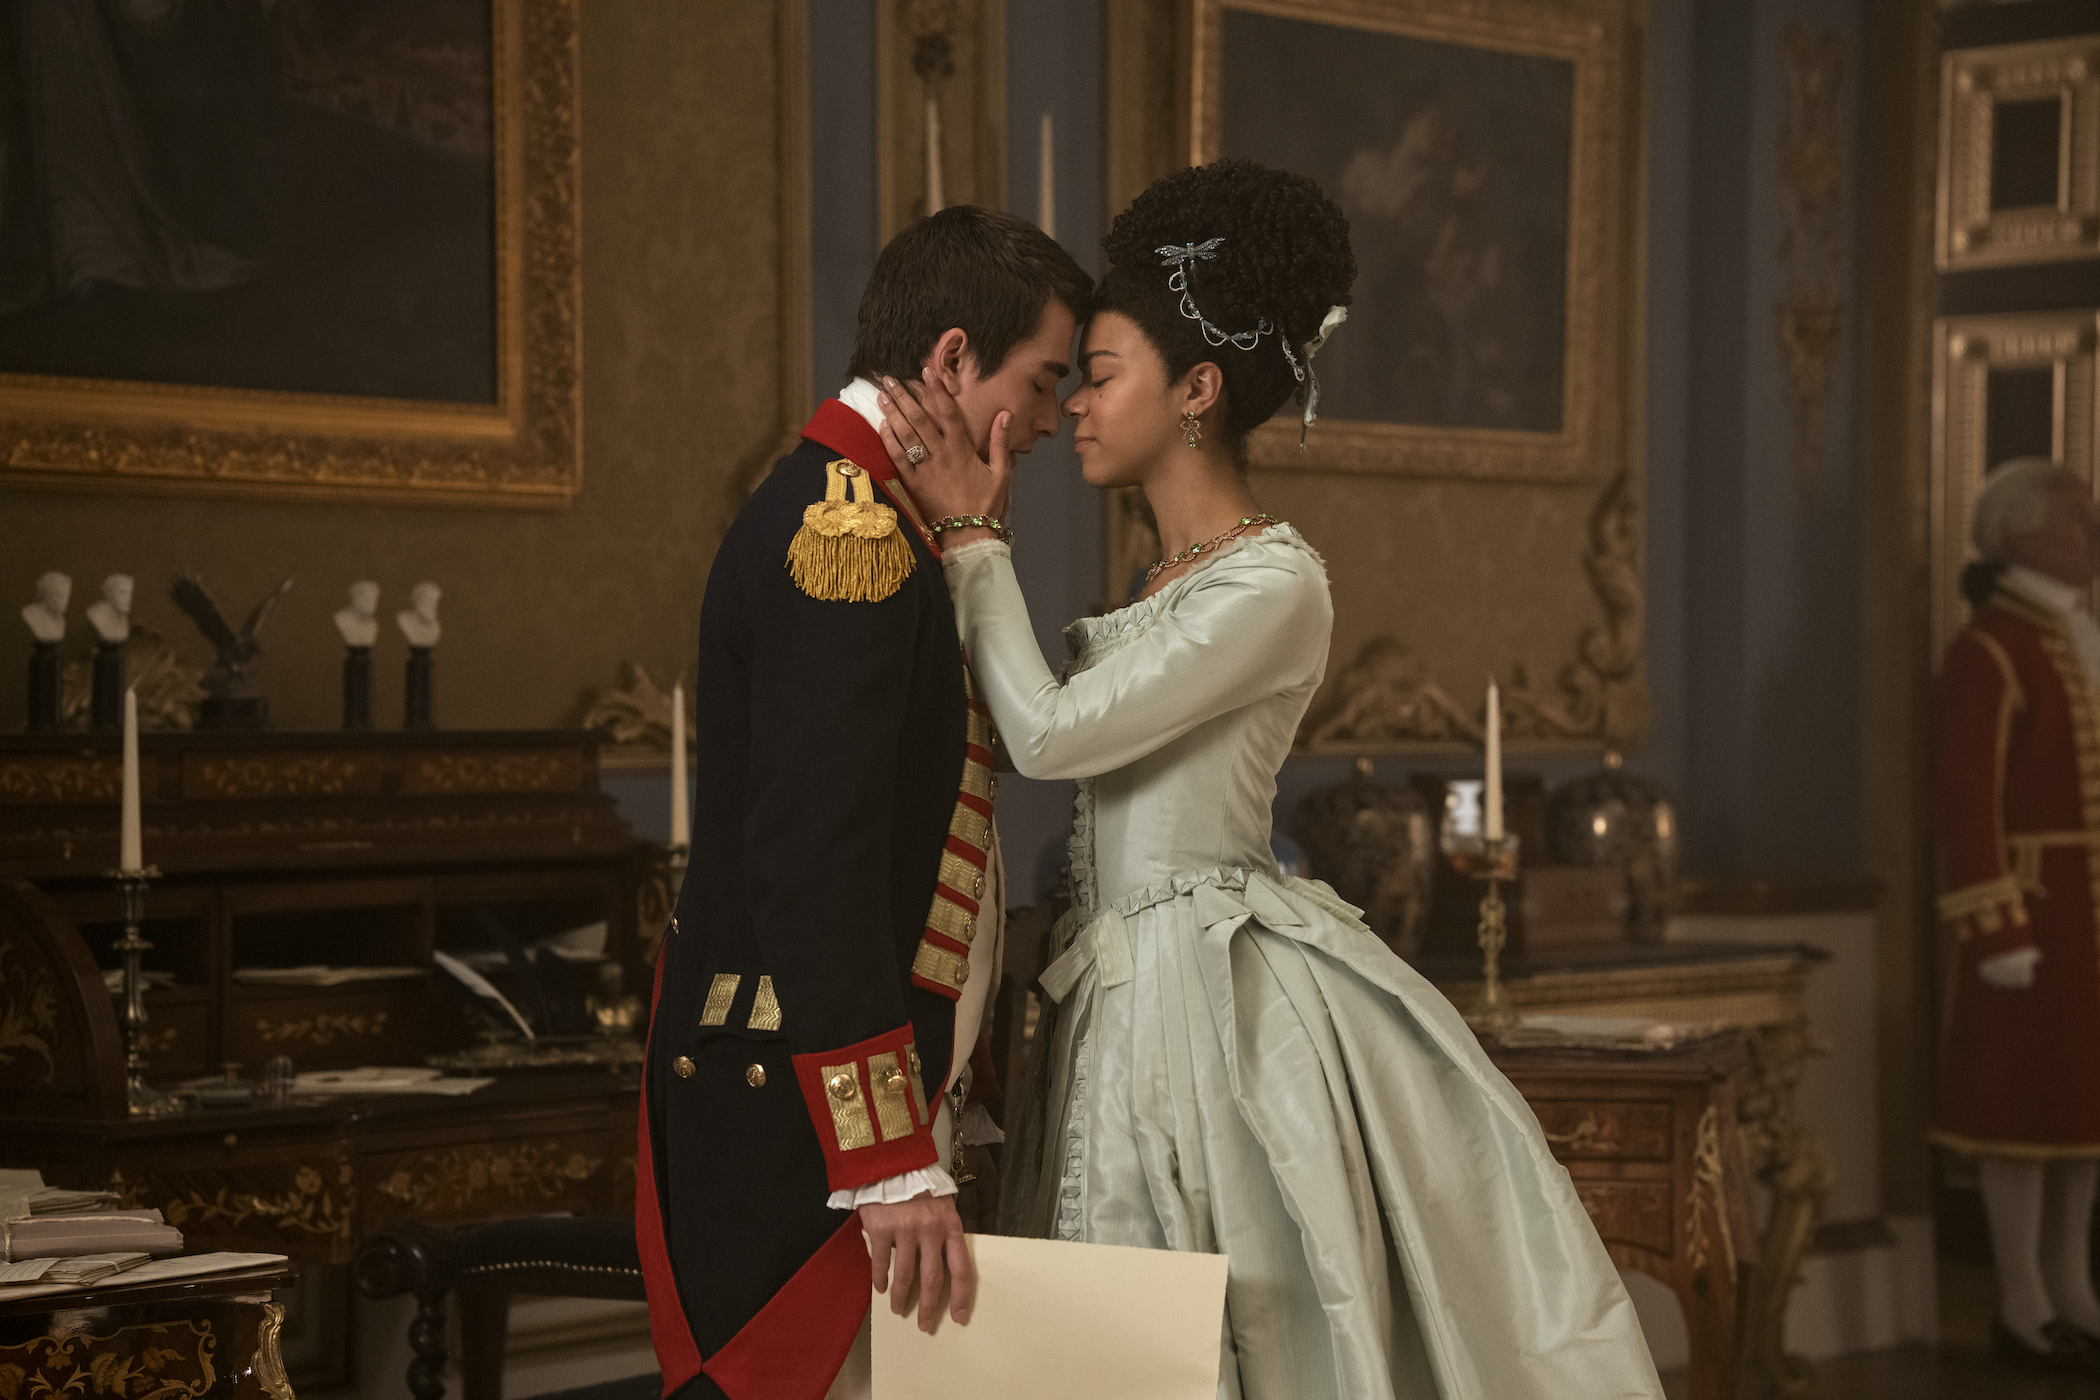 Romantic Kissing Pron Hd Wadding - What is King George III's Illness in 'Queen Charlotte: A Bridgerton Story'?